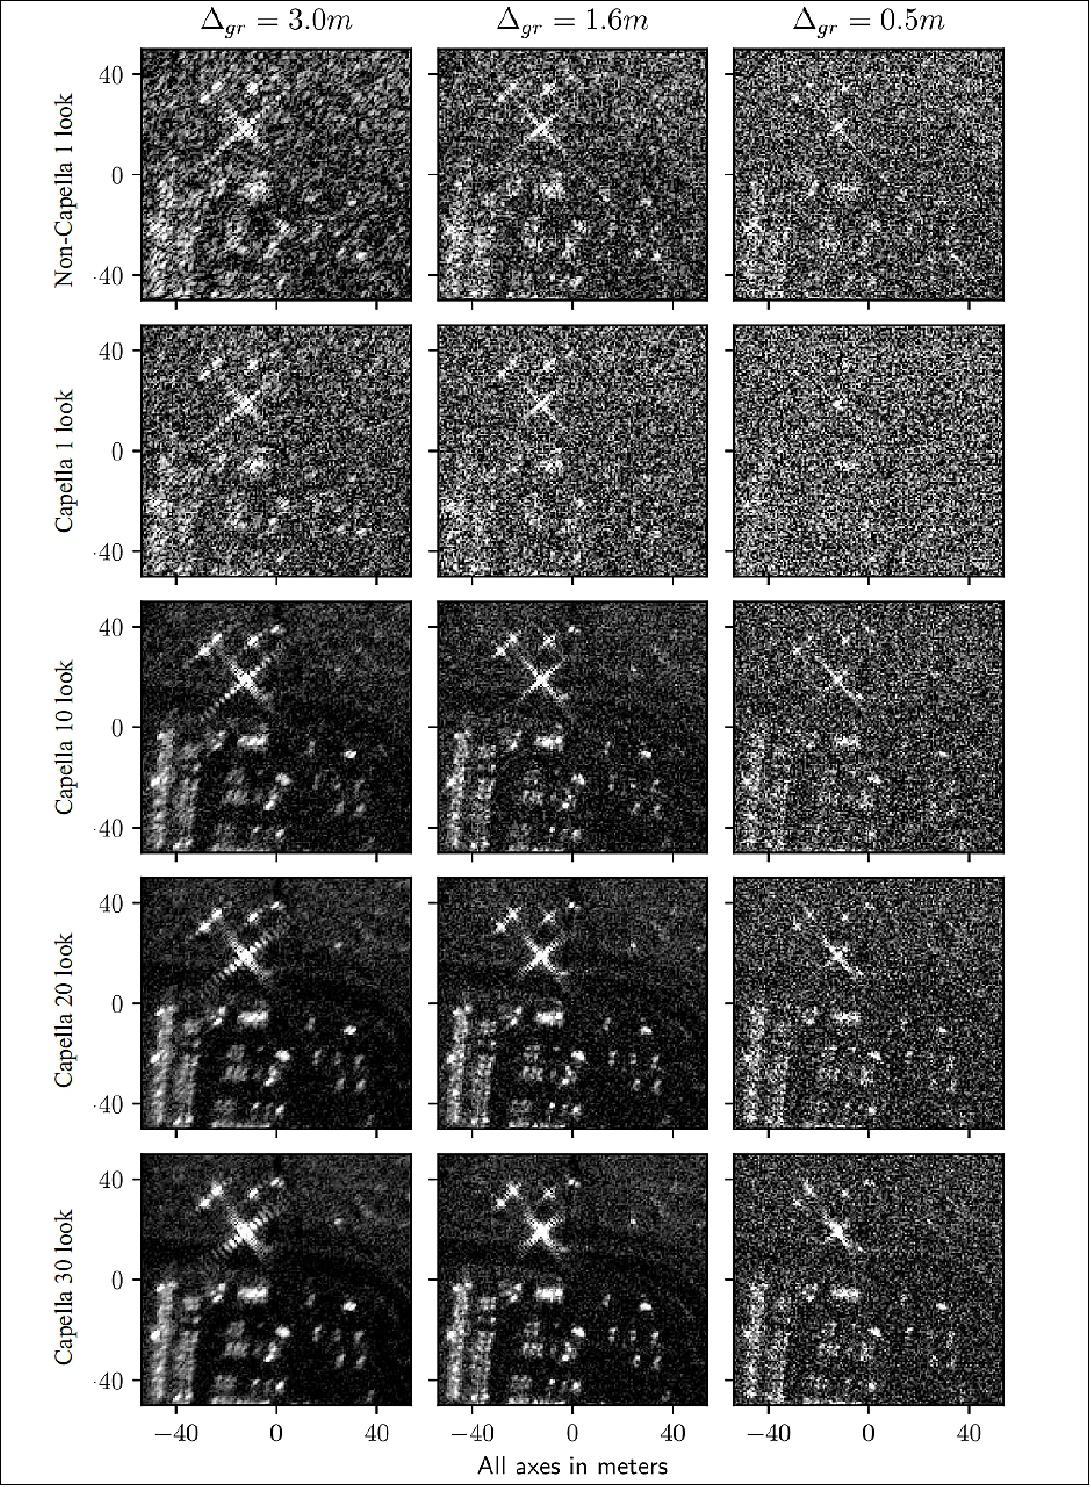 Figure 3: Simulated results for a typical large SAR (row 1) and Capella SAR (rows 2 through 5) showing the tradeoff between multi-looking, ground-range resolution, and NESZ for a spotlight image acquisition. Multi-looked staring spotlight acquisitions with Capella SAR recover contrast in the image without degrading resolution (image credit: Capella Space)